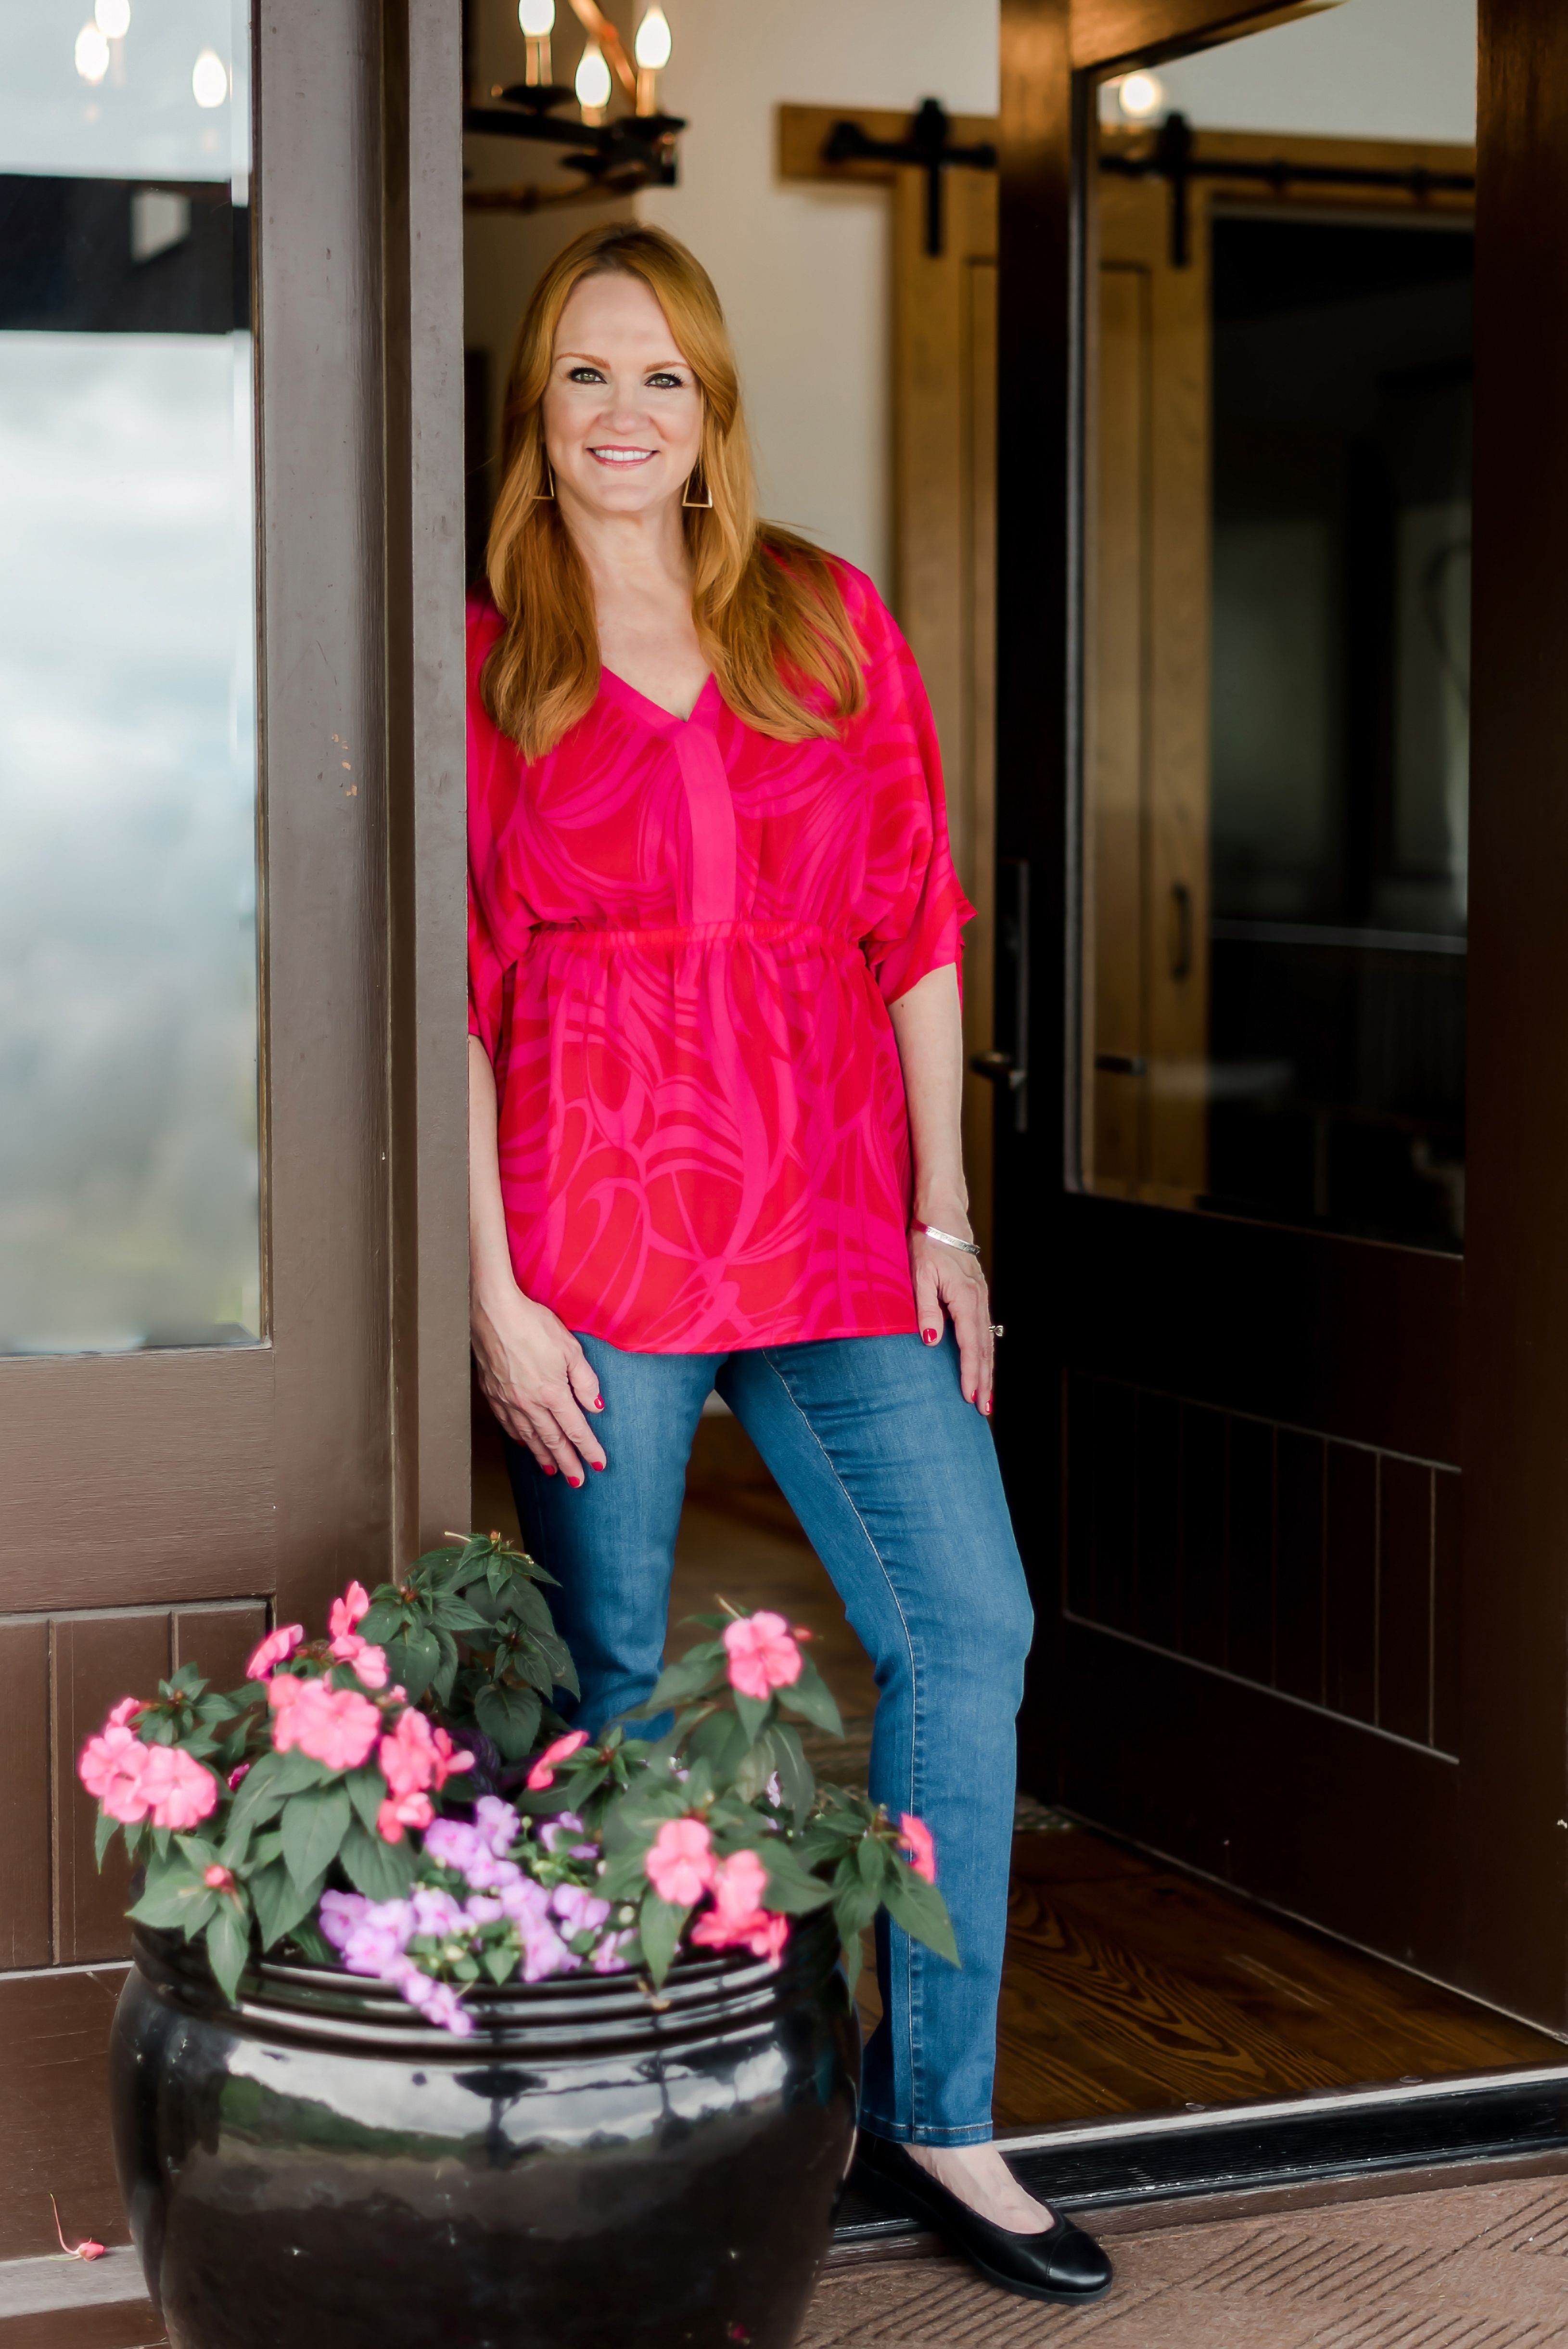 The Pioneer Woman Ree Drummond Lost 50 Pounds With This Tip